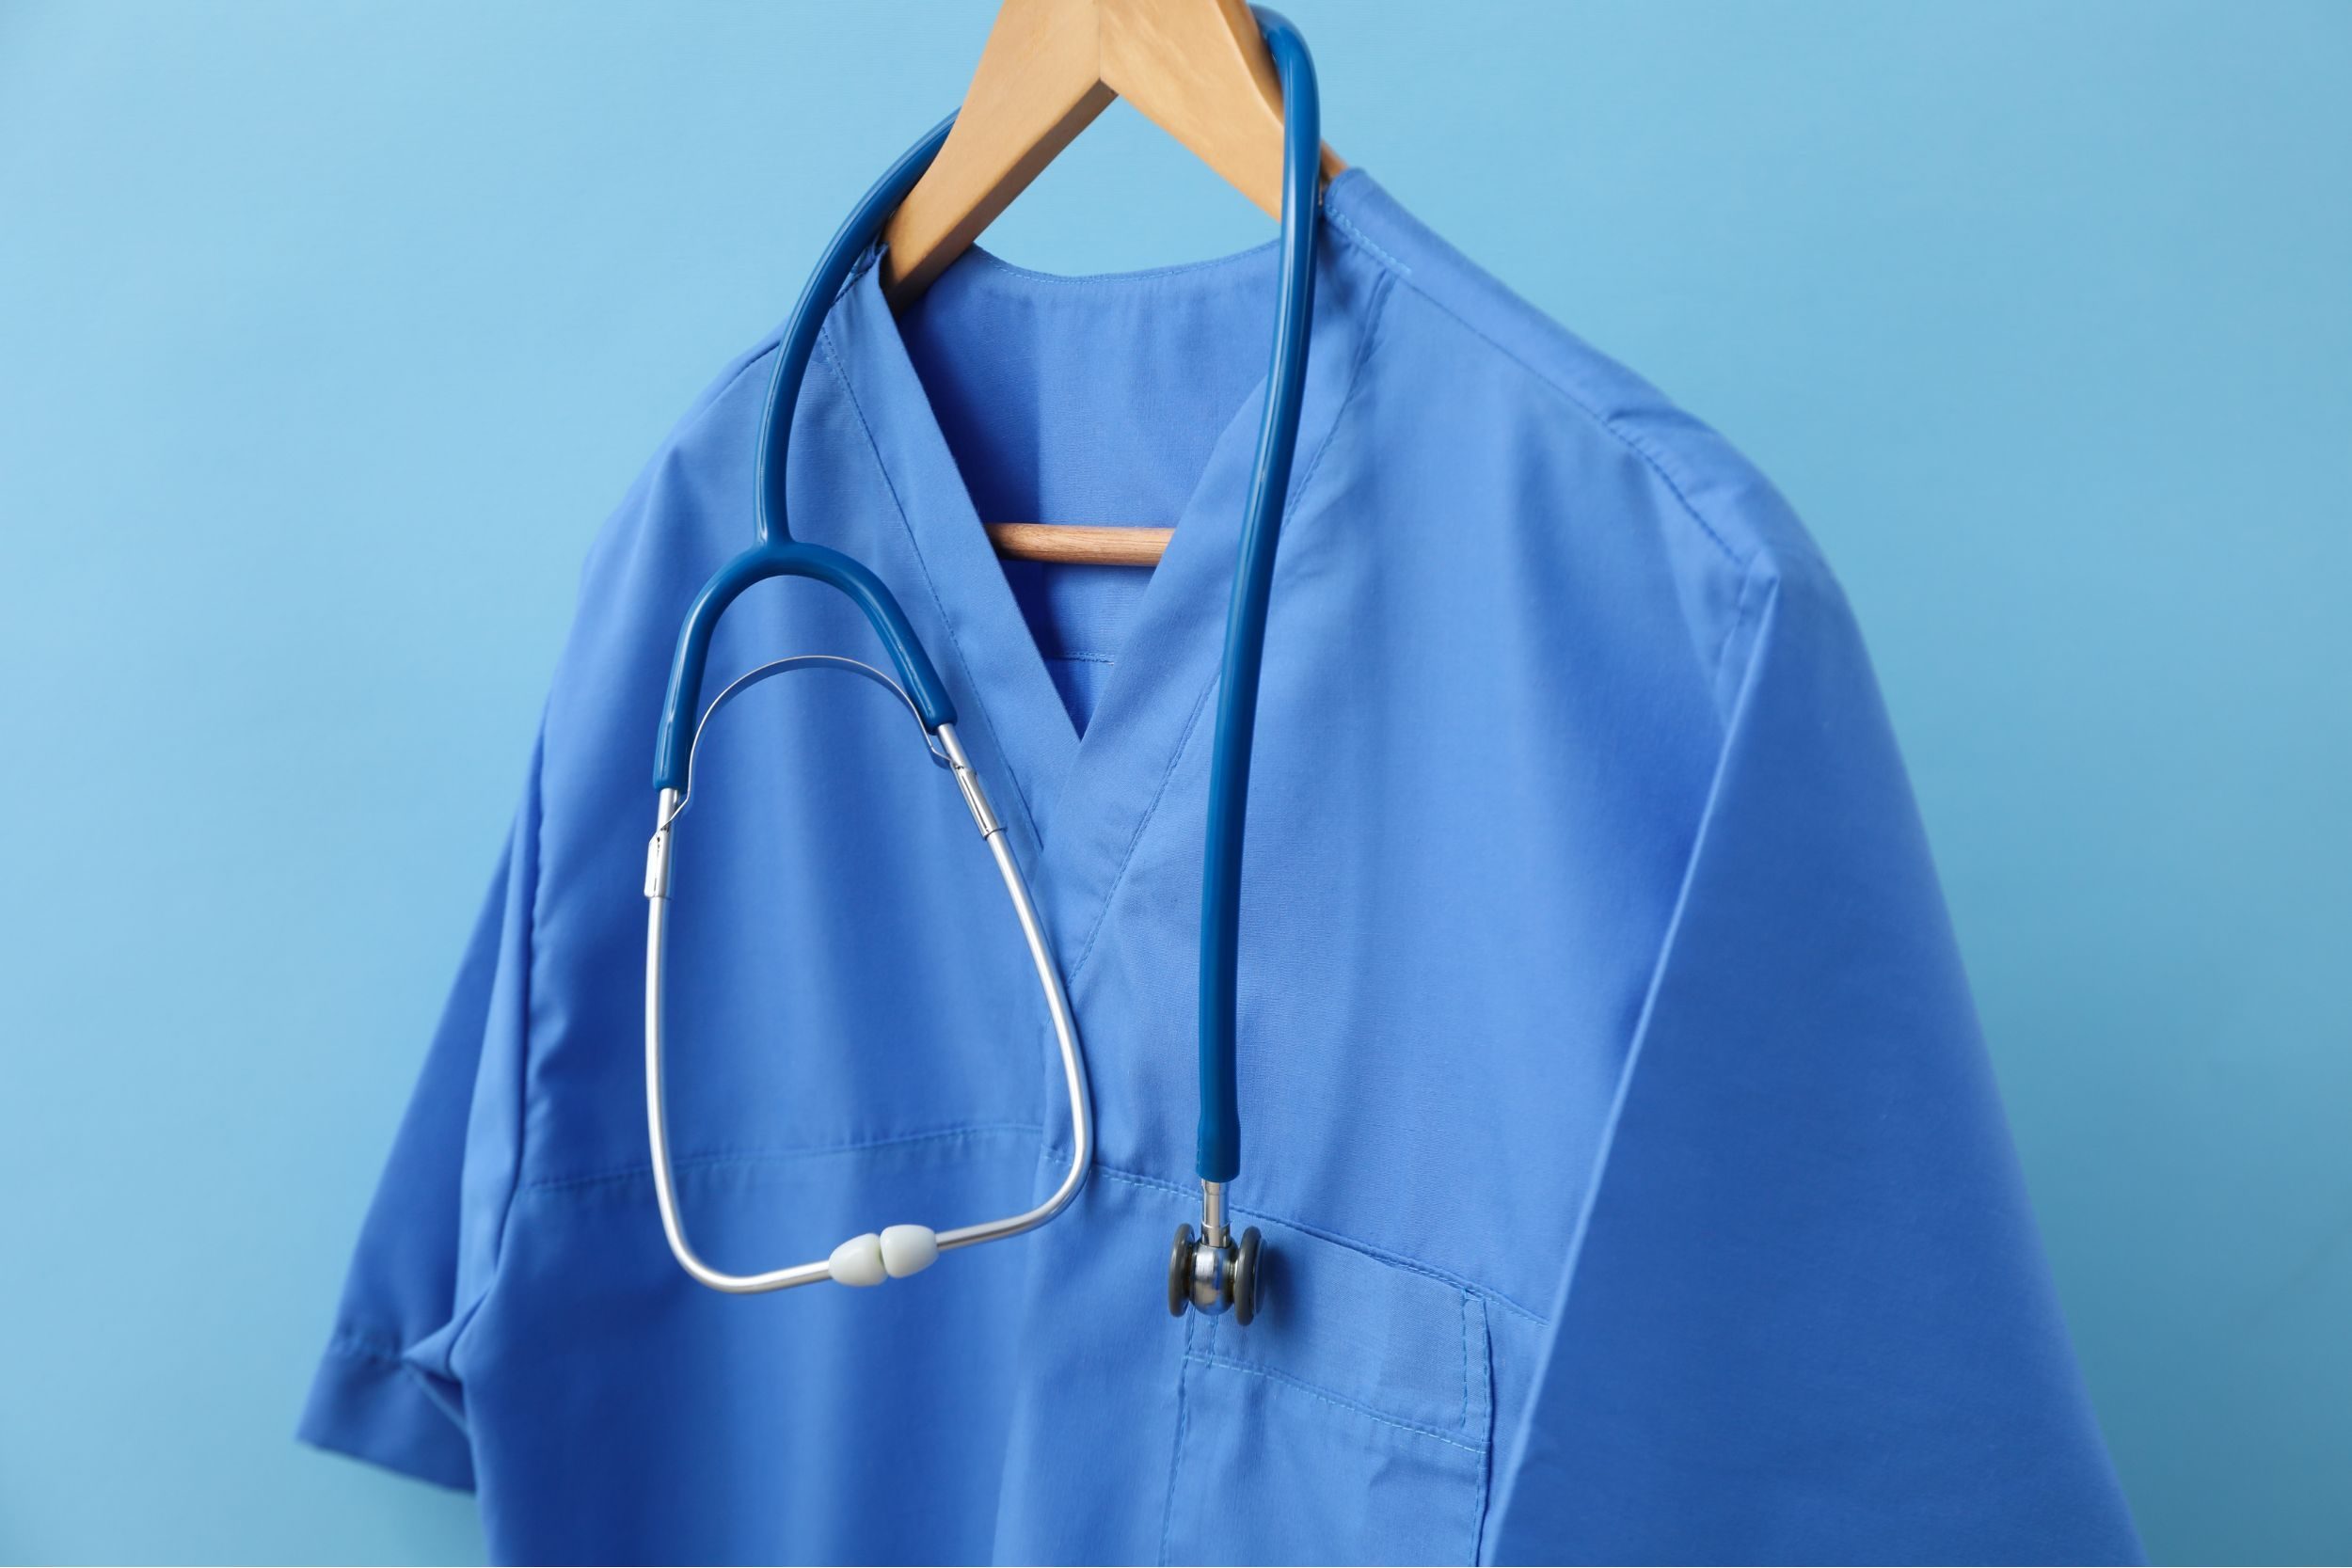 Scrubs and a stethoscope on a hanger